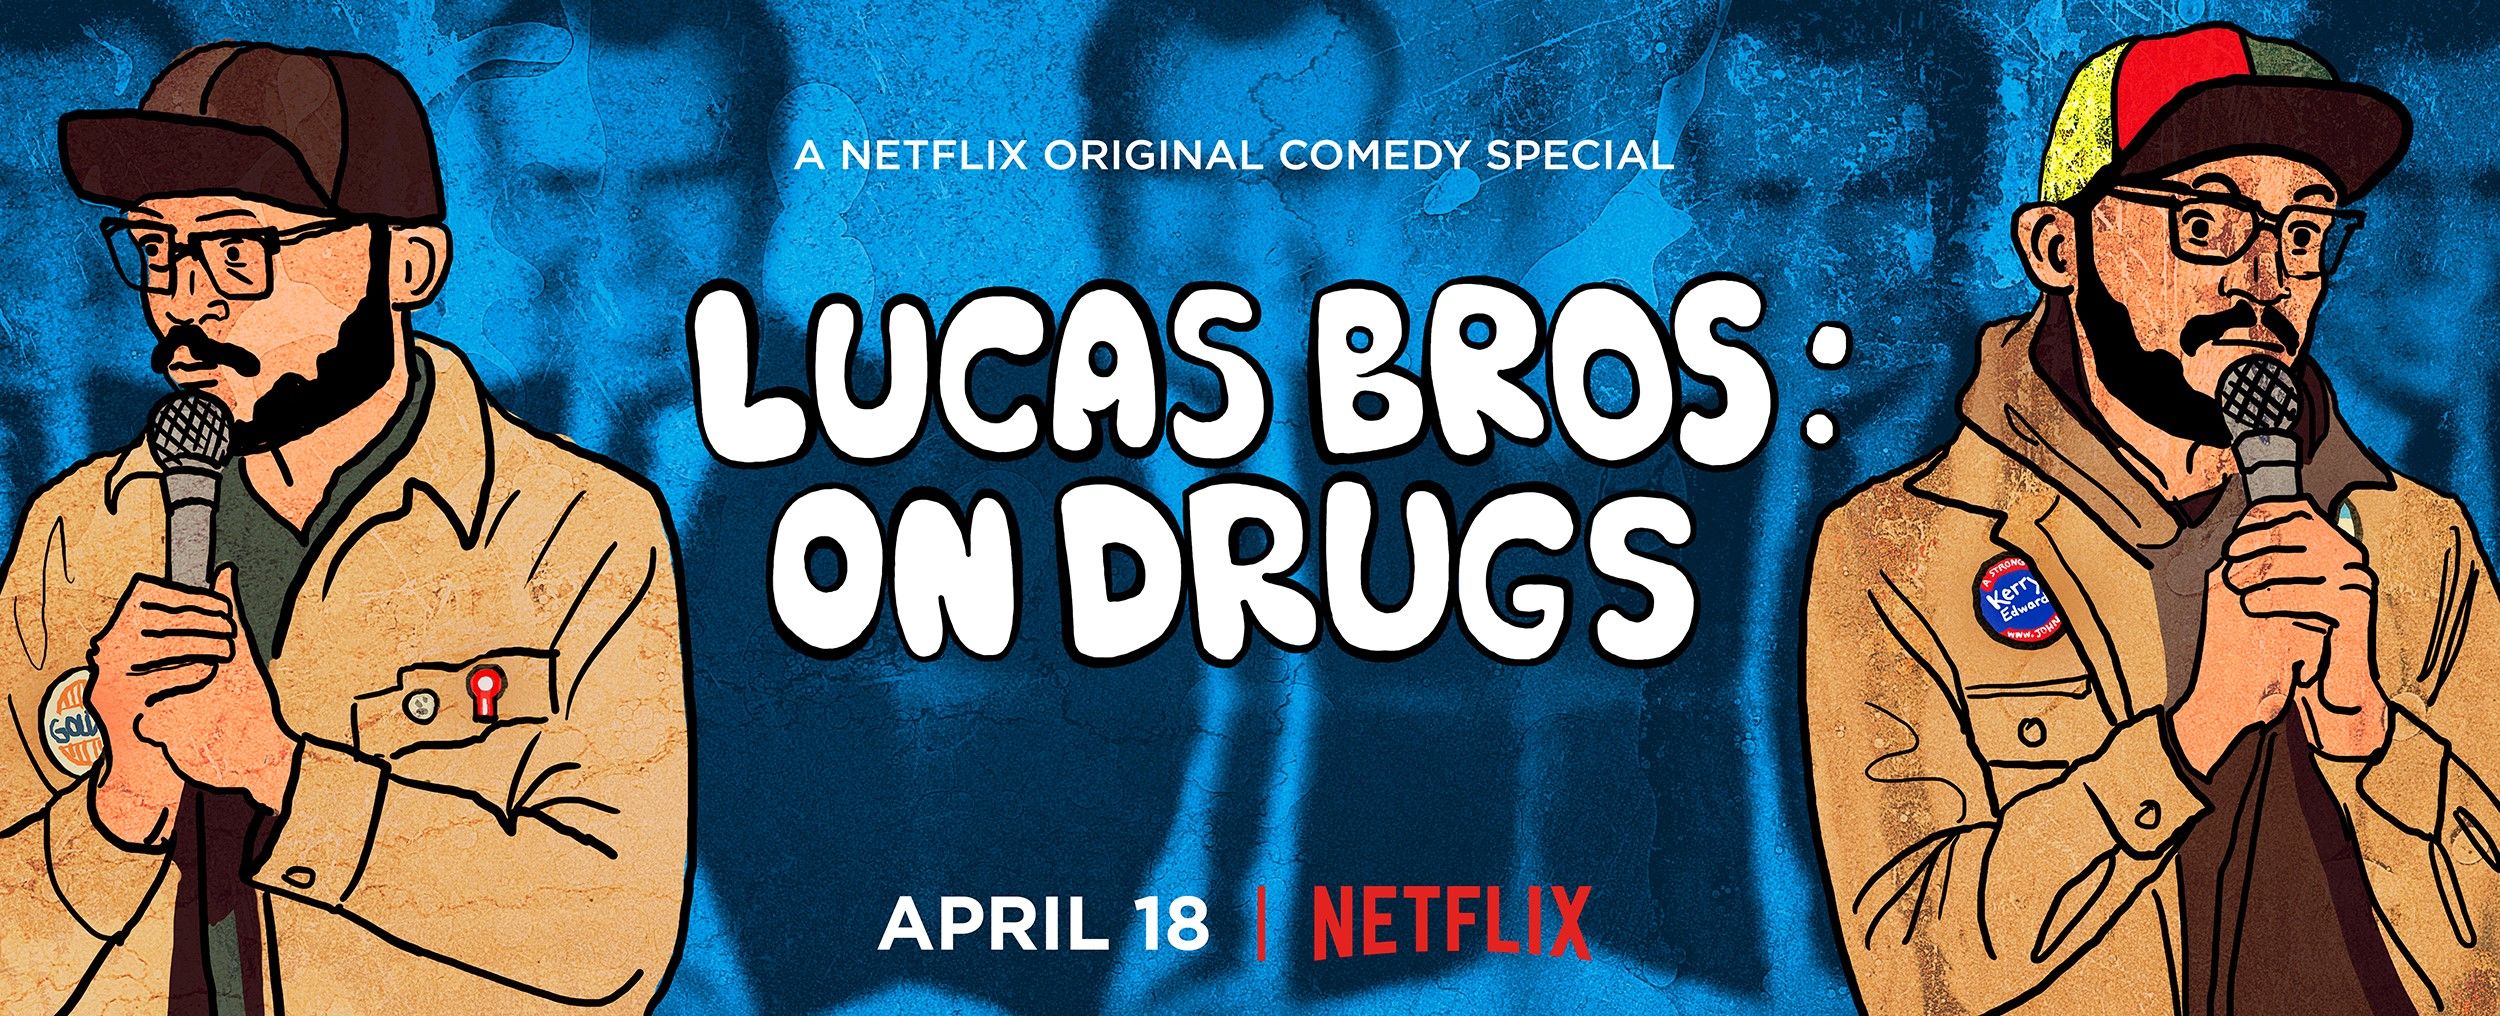 Lucas Brothers On Drugs 4K 2017 big poster